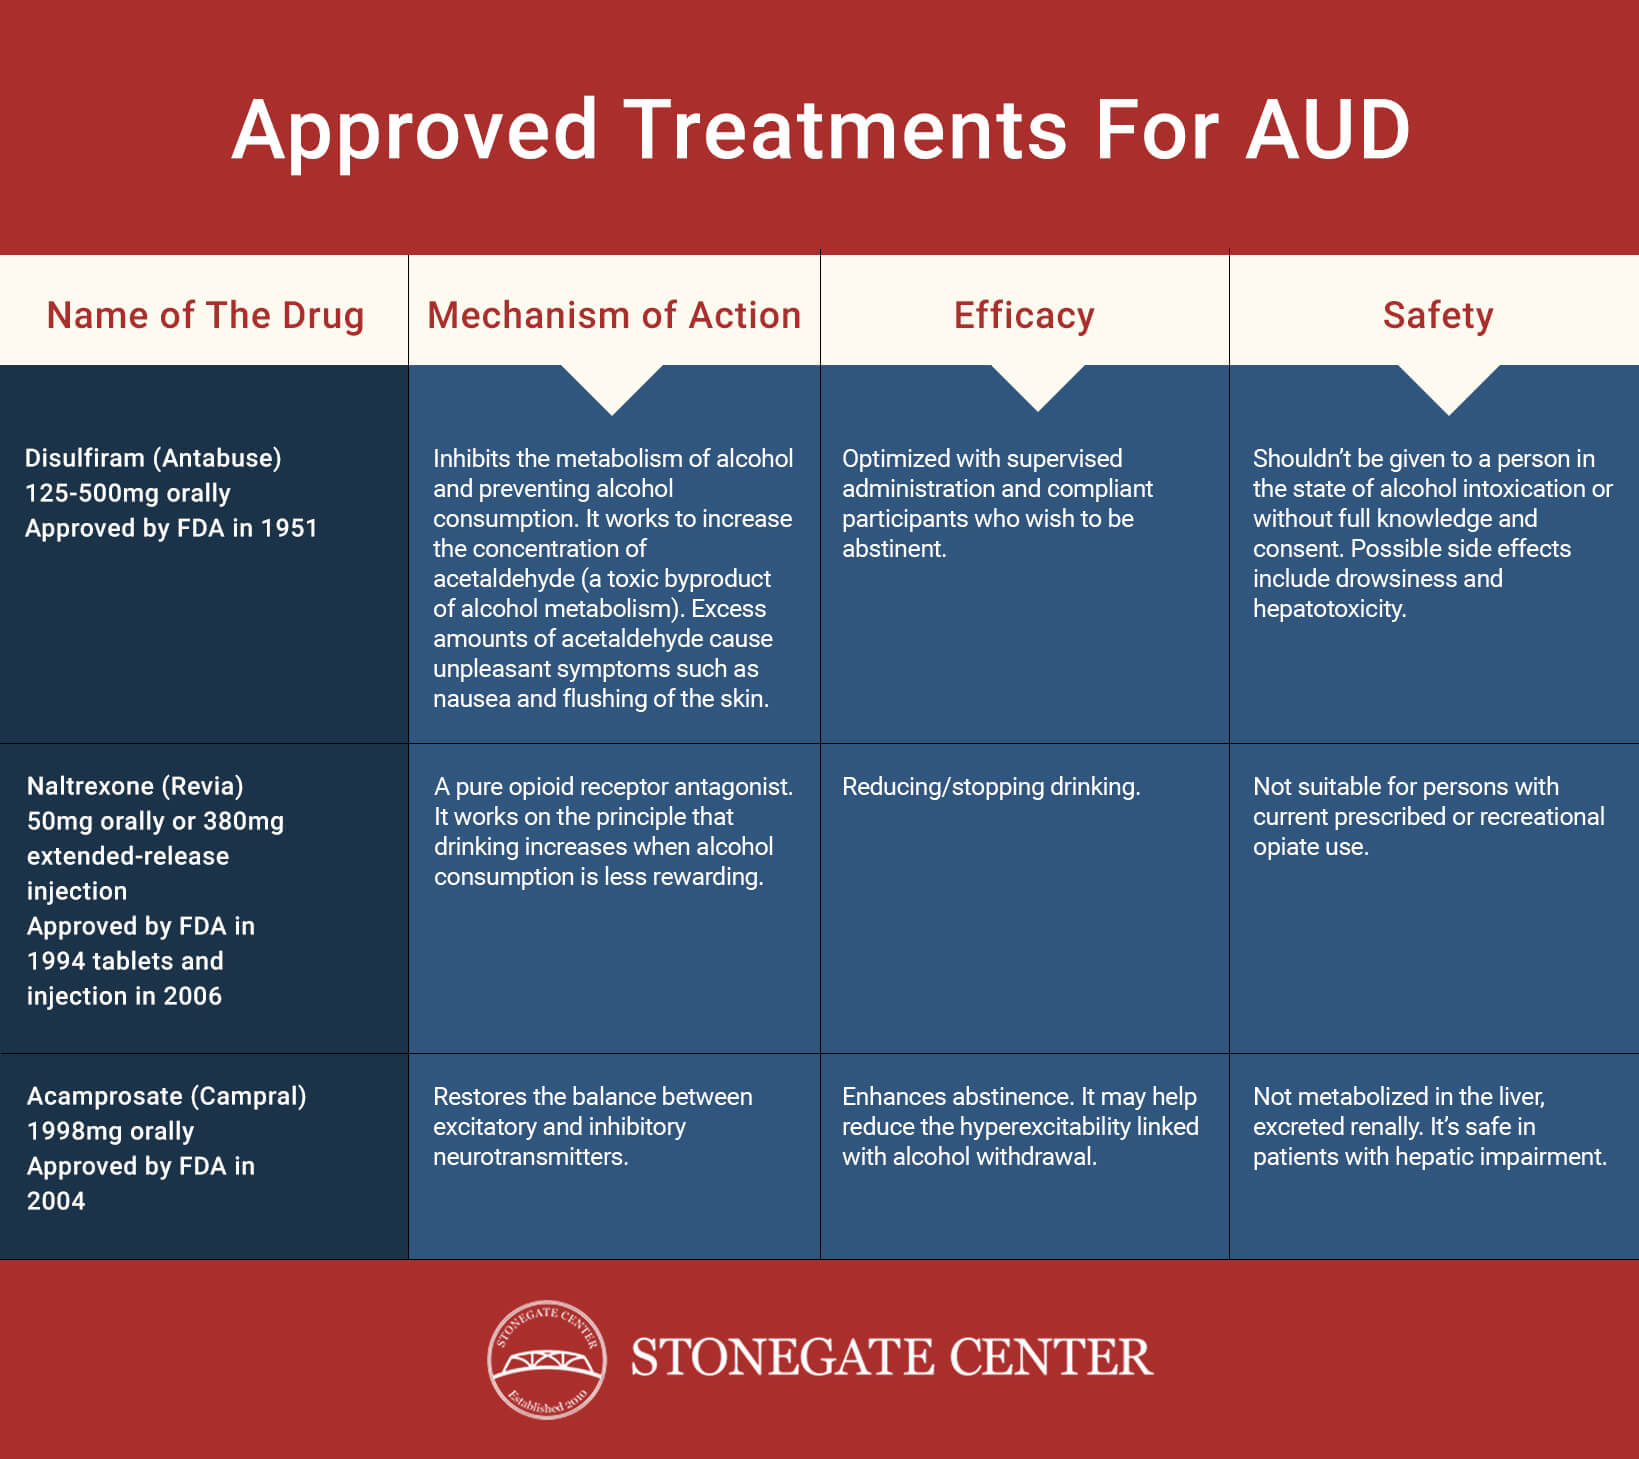 Stonegate Center Blog - Psychedelic Approach to Treating Alcoholism - Approved Treatments for Aud Table